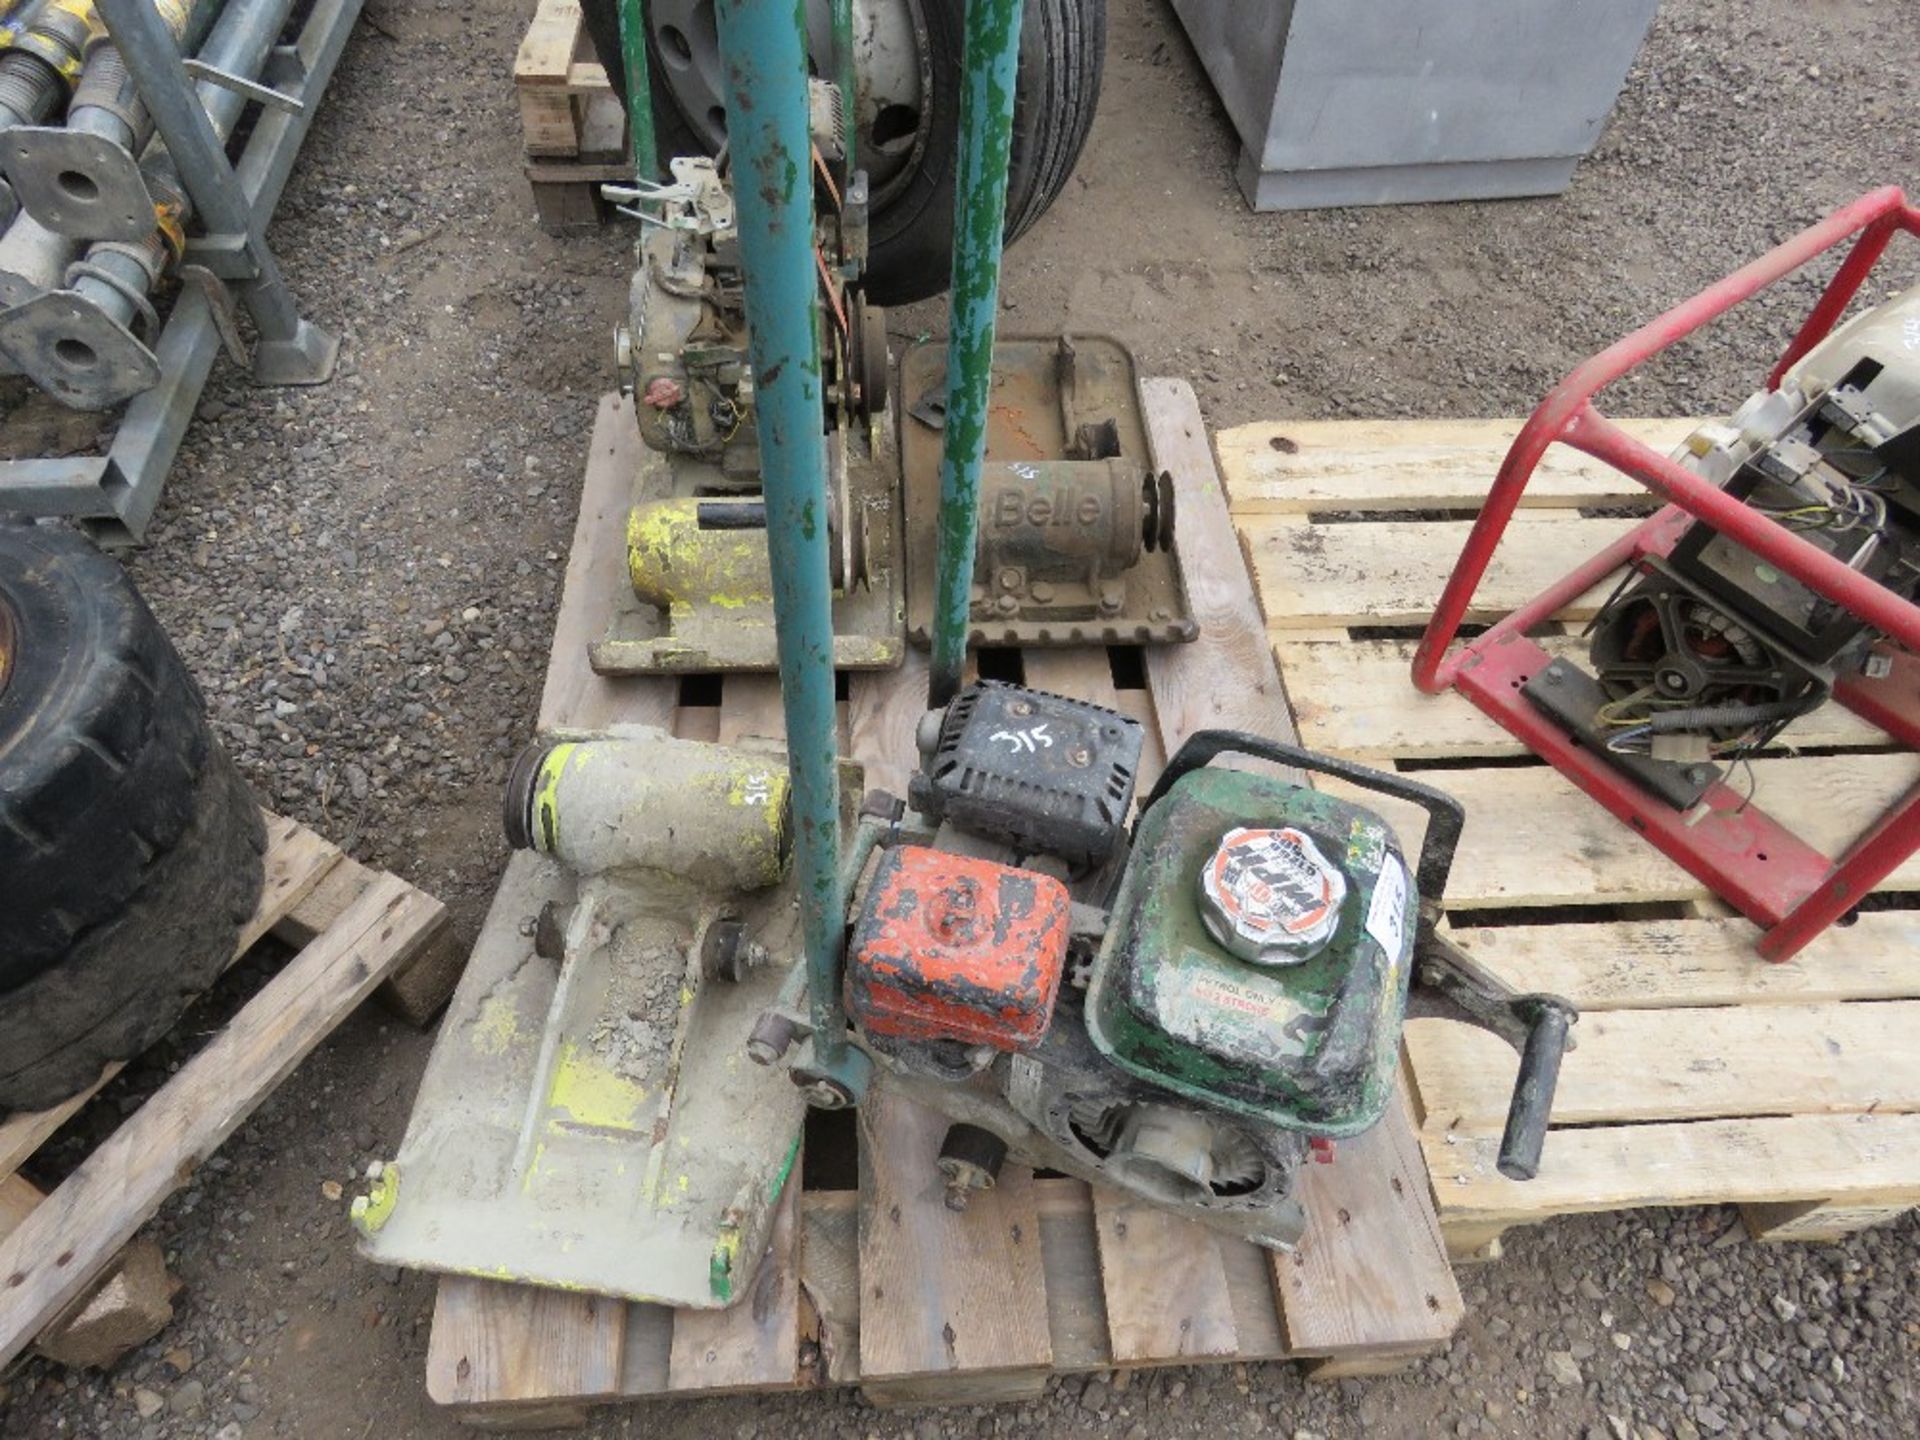 2 X PETROL COMPACTION PLATES FOR SPARES. SOURCED FROM DEPOT CLOSURE. - Image 3 of 3